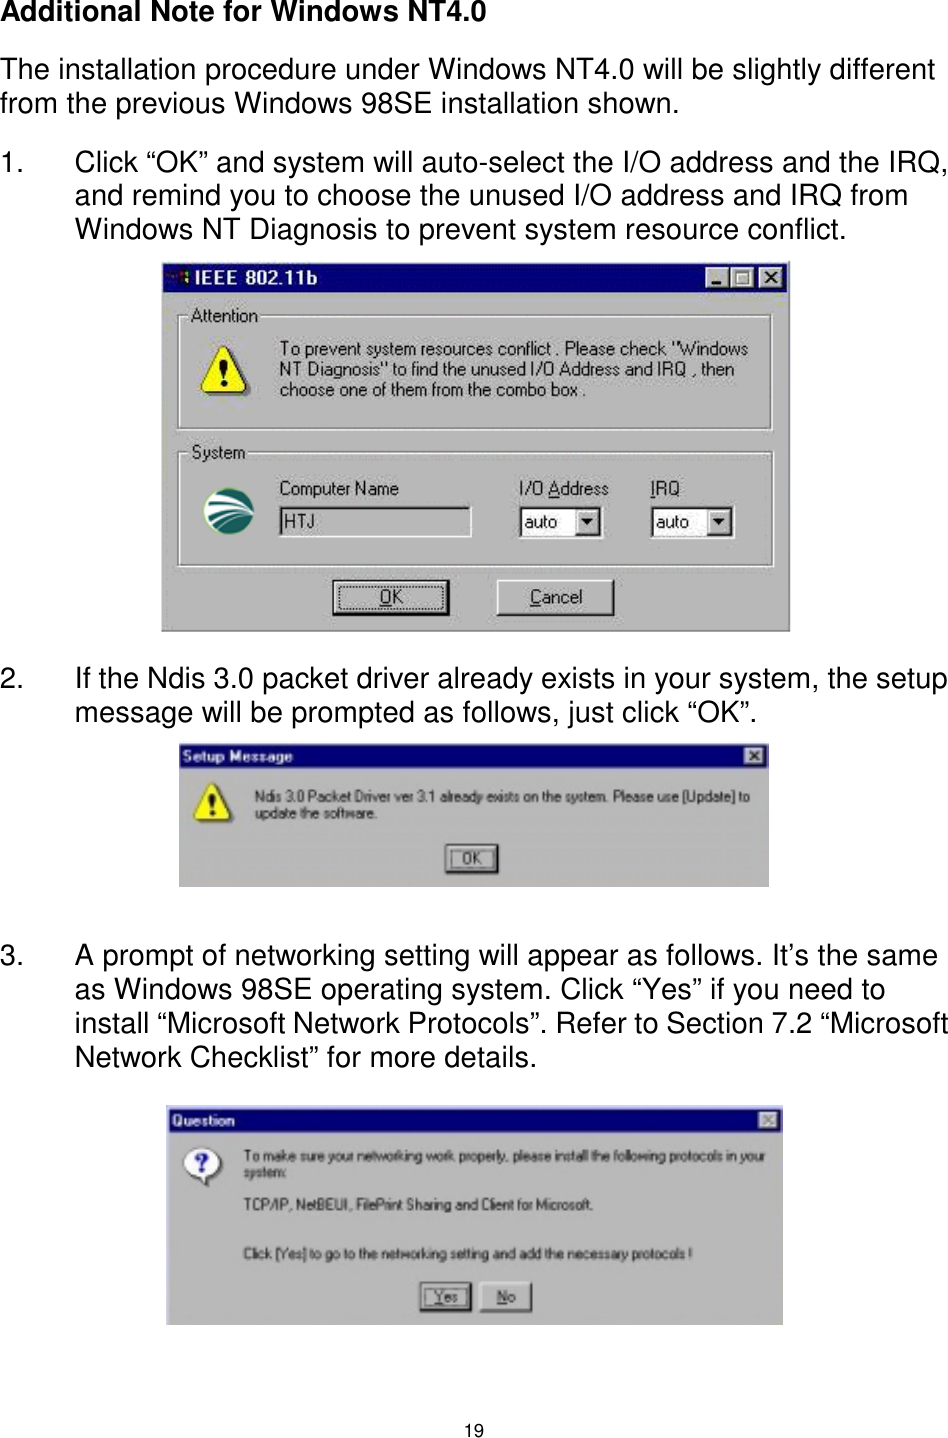  19  Additional Note for Windows NT4.0 The installation procedure under Windows NT4.0 will be slightly different from the previous Windows 98SE installation shown. 1.  Click “OK” and system will auto-select the I/O address and the IRQ, and remind you to choose the unused I/O address and IRQ from Windows NT Diagnosis to prevent system resource conflict.         2.  If the Ndis 3.0 packet driver already exists in your system, the setup message will be prompted as follows, just click “OK”.     3.  A prompt of networking setting will appear as follows. It’s the same as Windows 98SE operating system. Click “Yes” if you need to install “Microsoft Network Protocols”. Refer to Section 7.2 “Microsoft Network Checklist” for more details.     